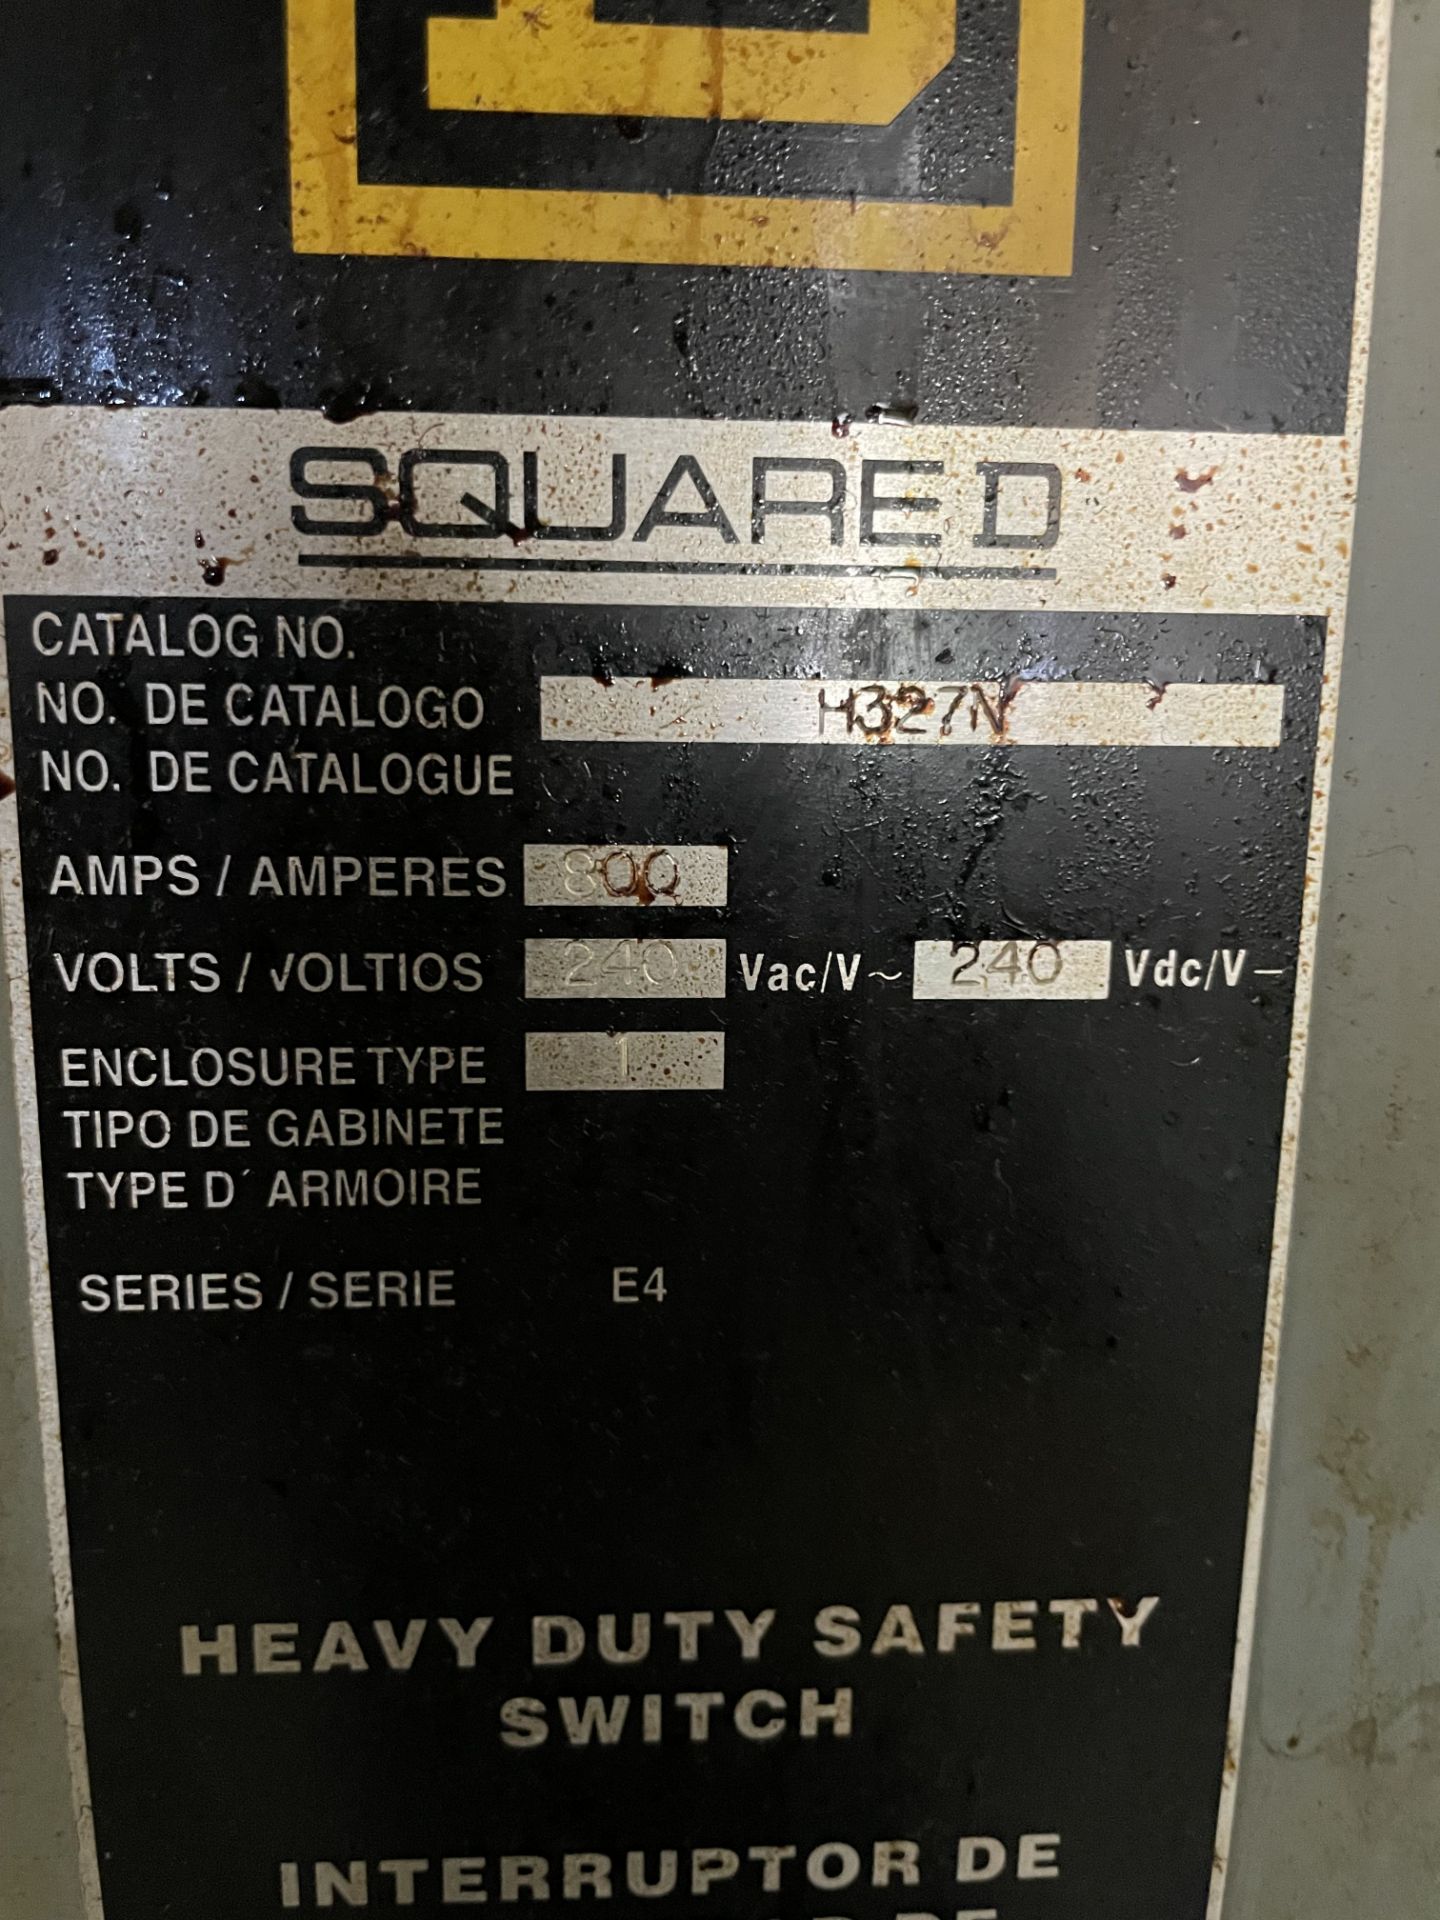 800 AMP SQUARE D CAT NO. 14327N SAFETY SWITCH - Image 2 of 2